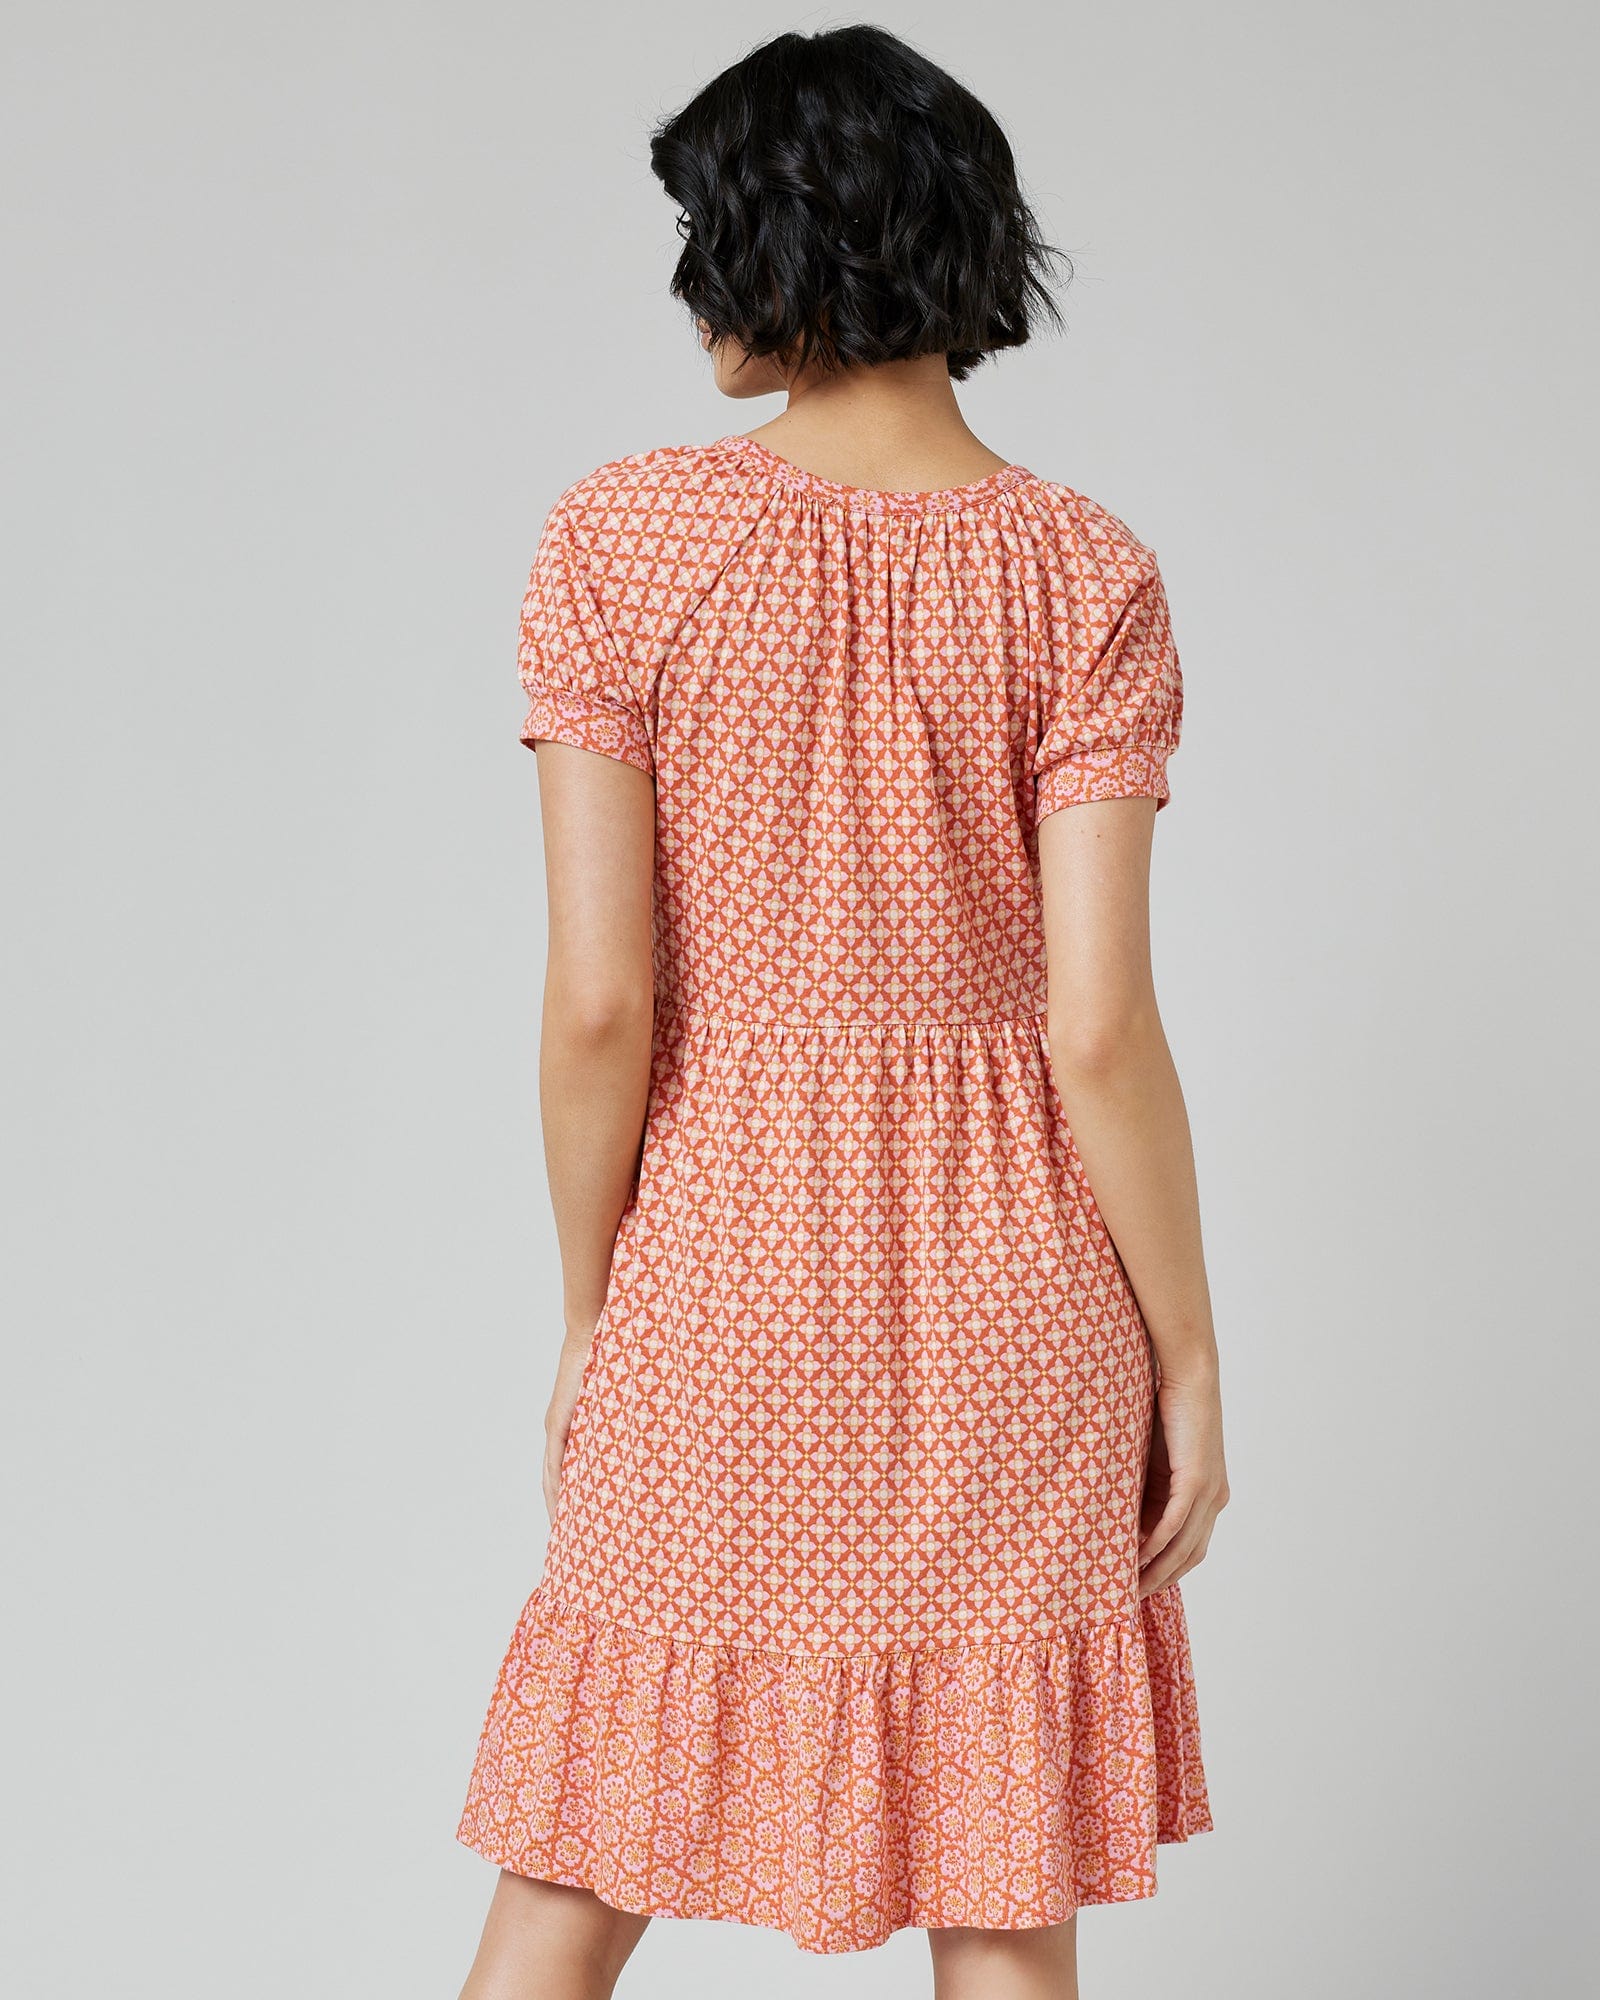 Woman in a short sleeve, knee-length, orange with white polka dot dress